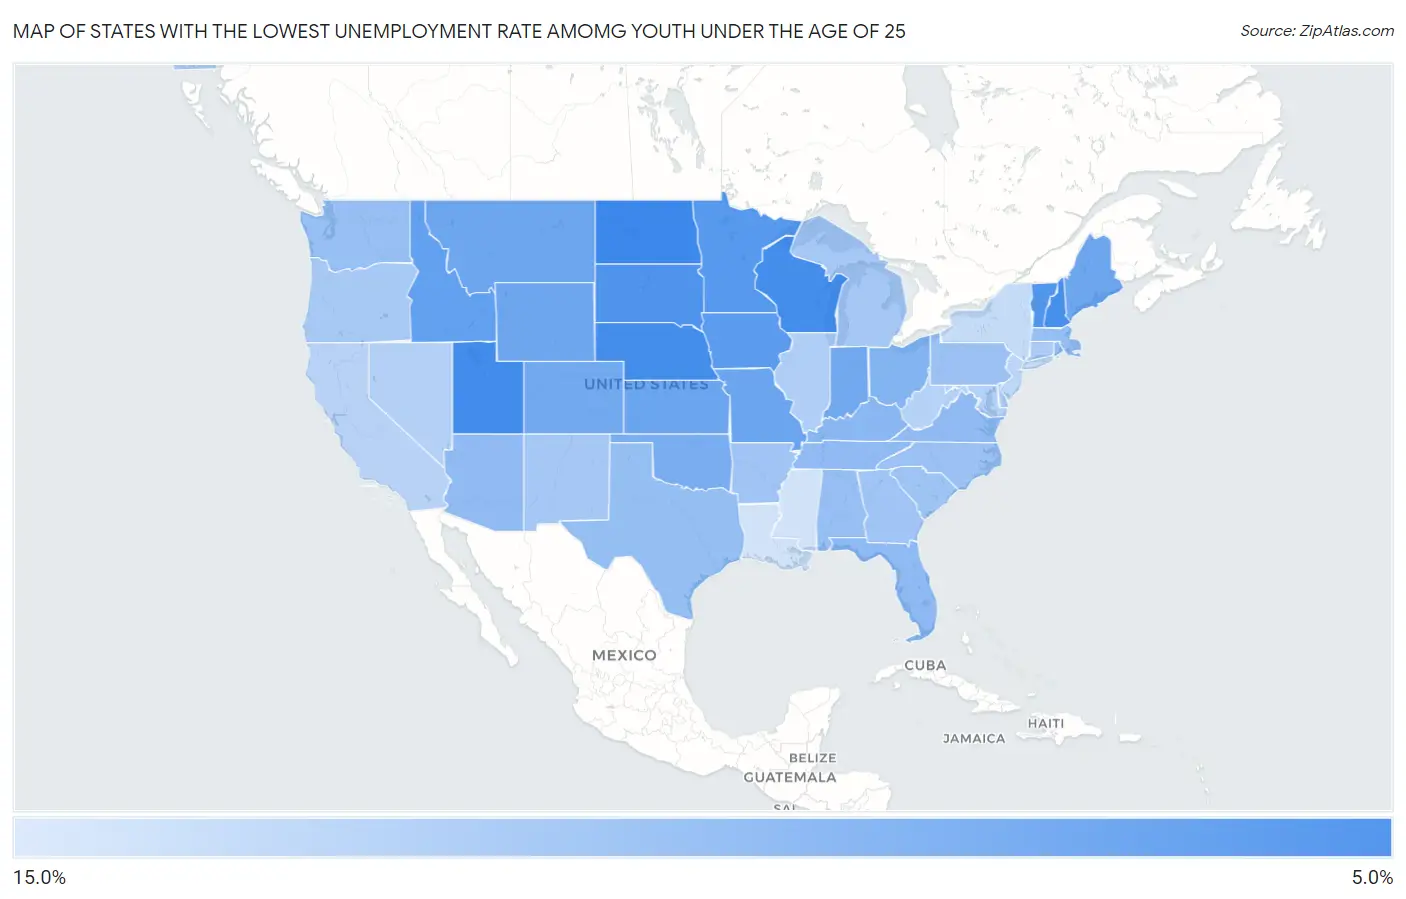 States with the Lowest Unemployment Rate Amomg Youth Under the Age of 25 in the United States Map